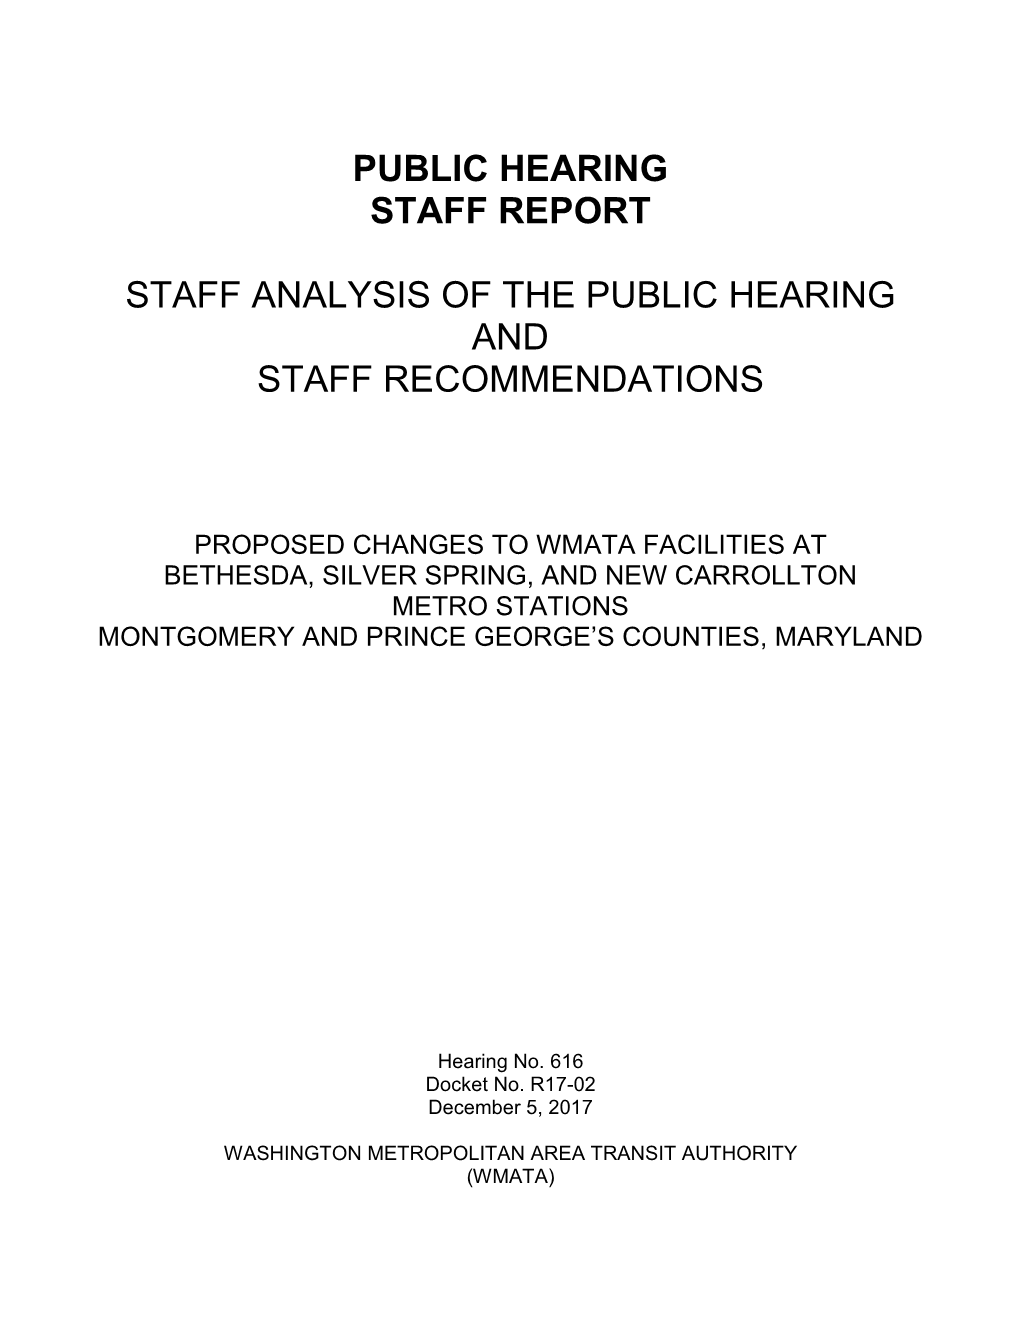 Public Hearing Staff Report, Staff Analysis and Staff Recommendations